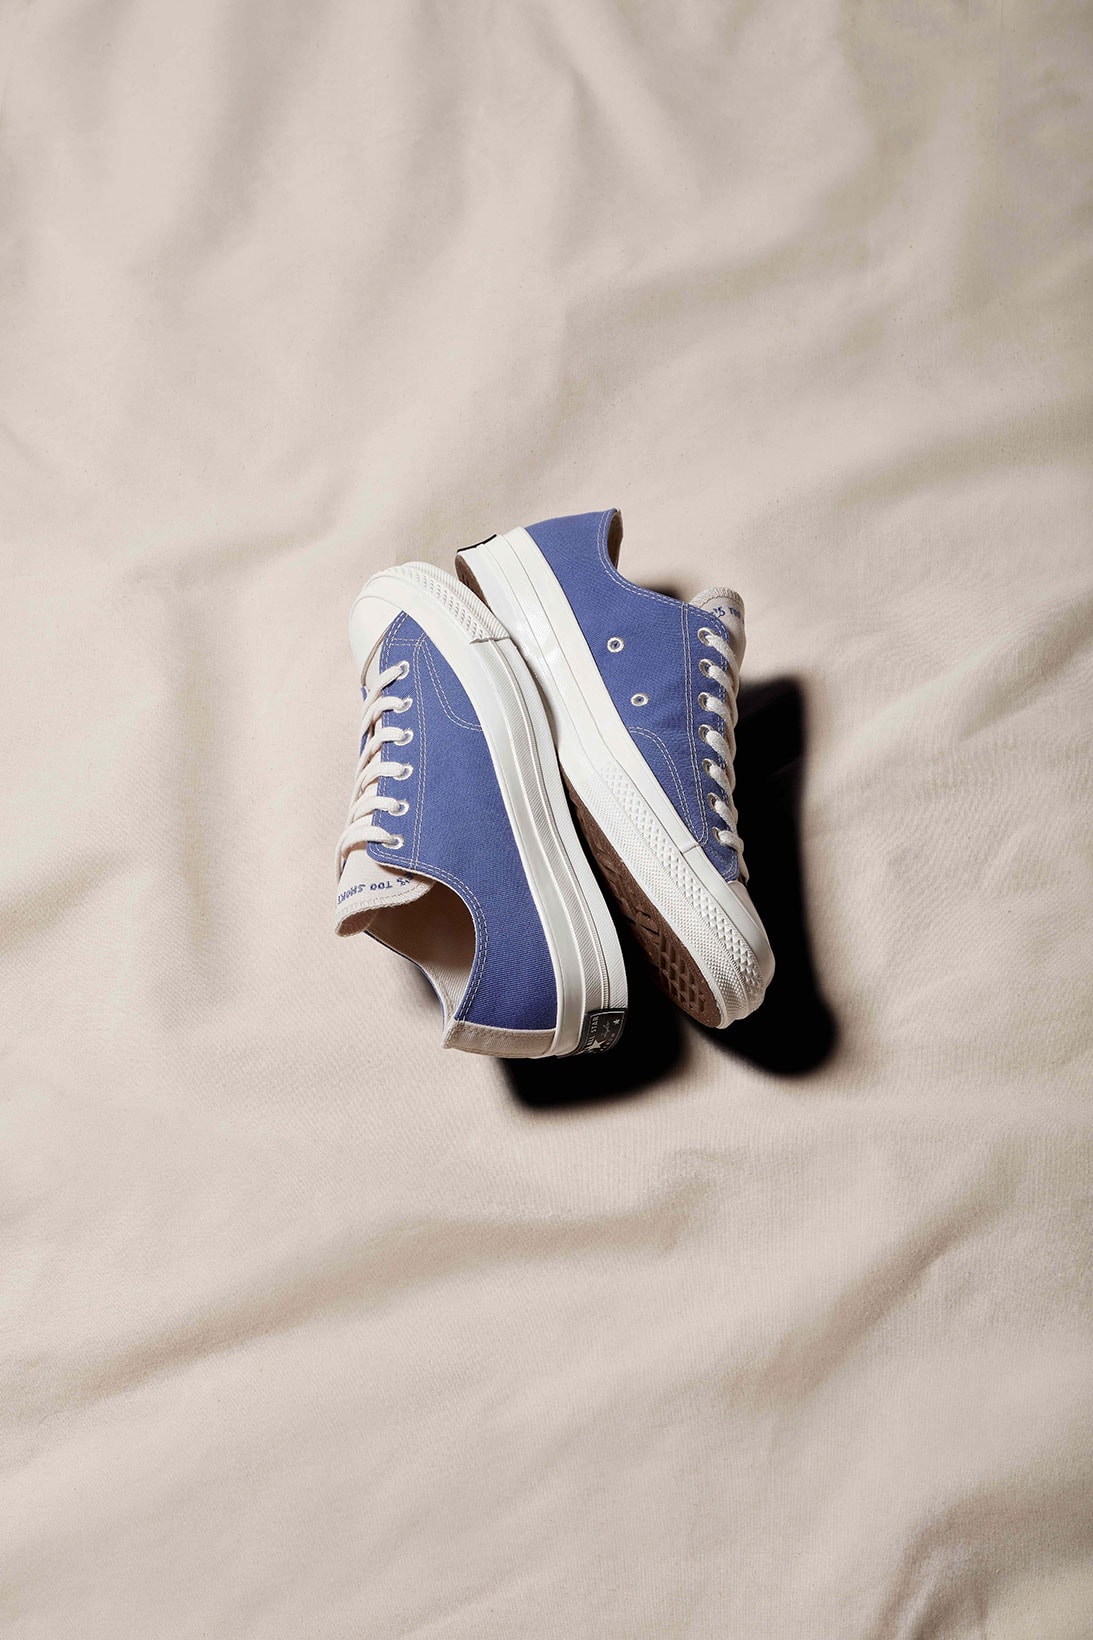 converse chuck taylor all star 70 sustainability ecofriendly biodegradable footwear